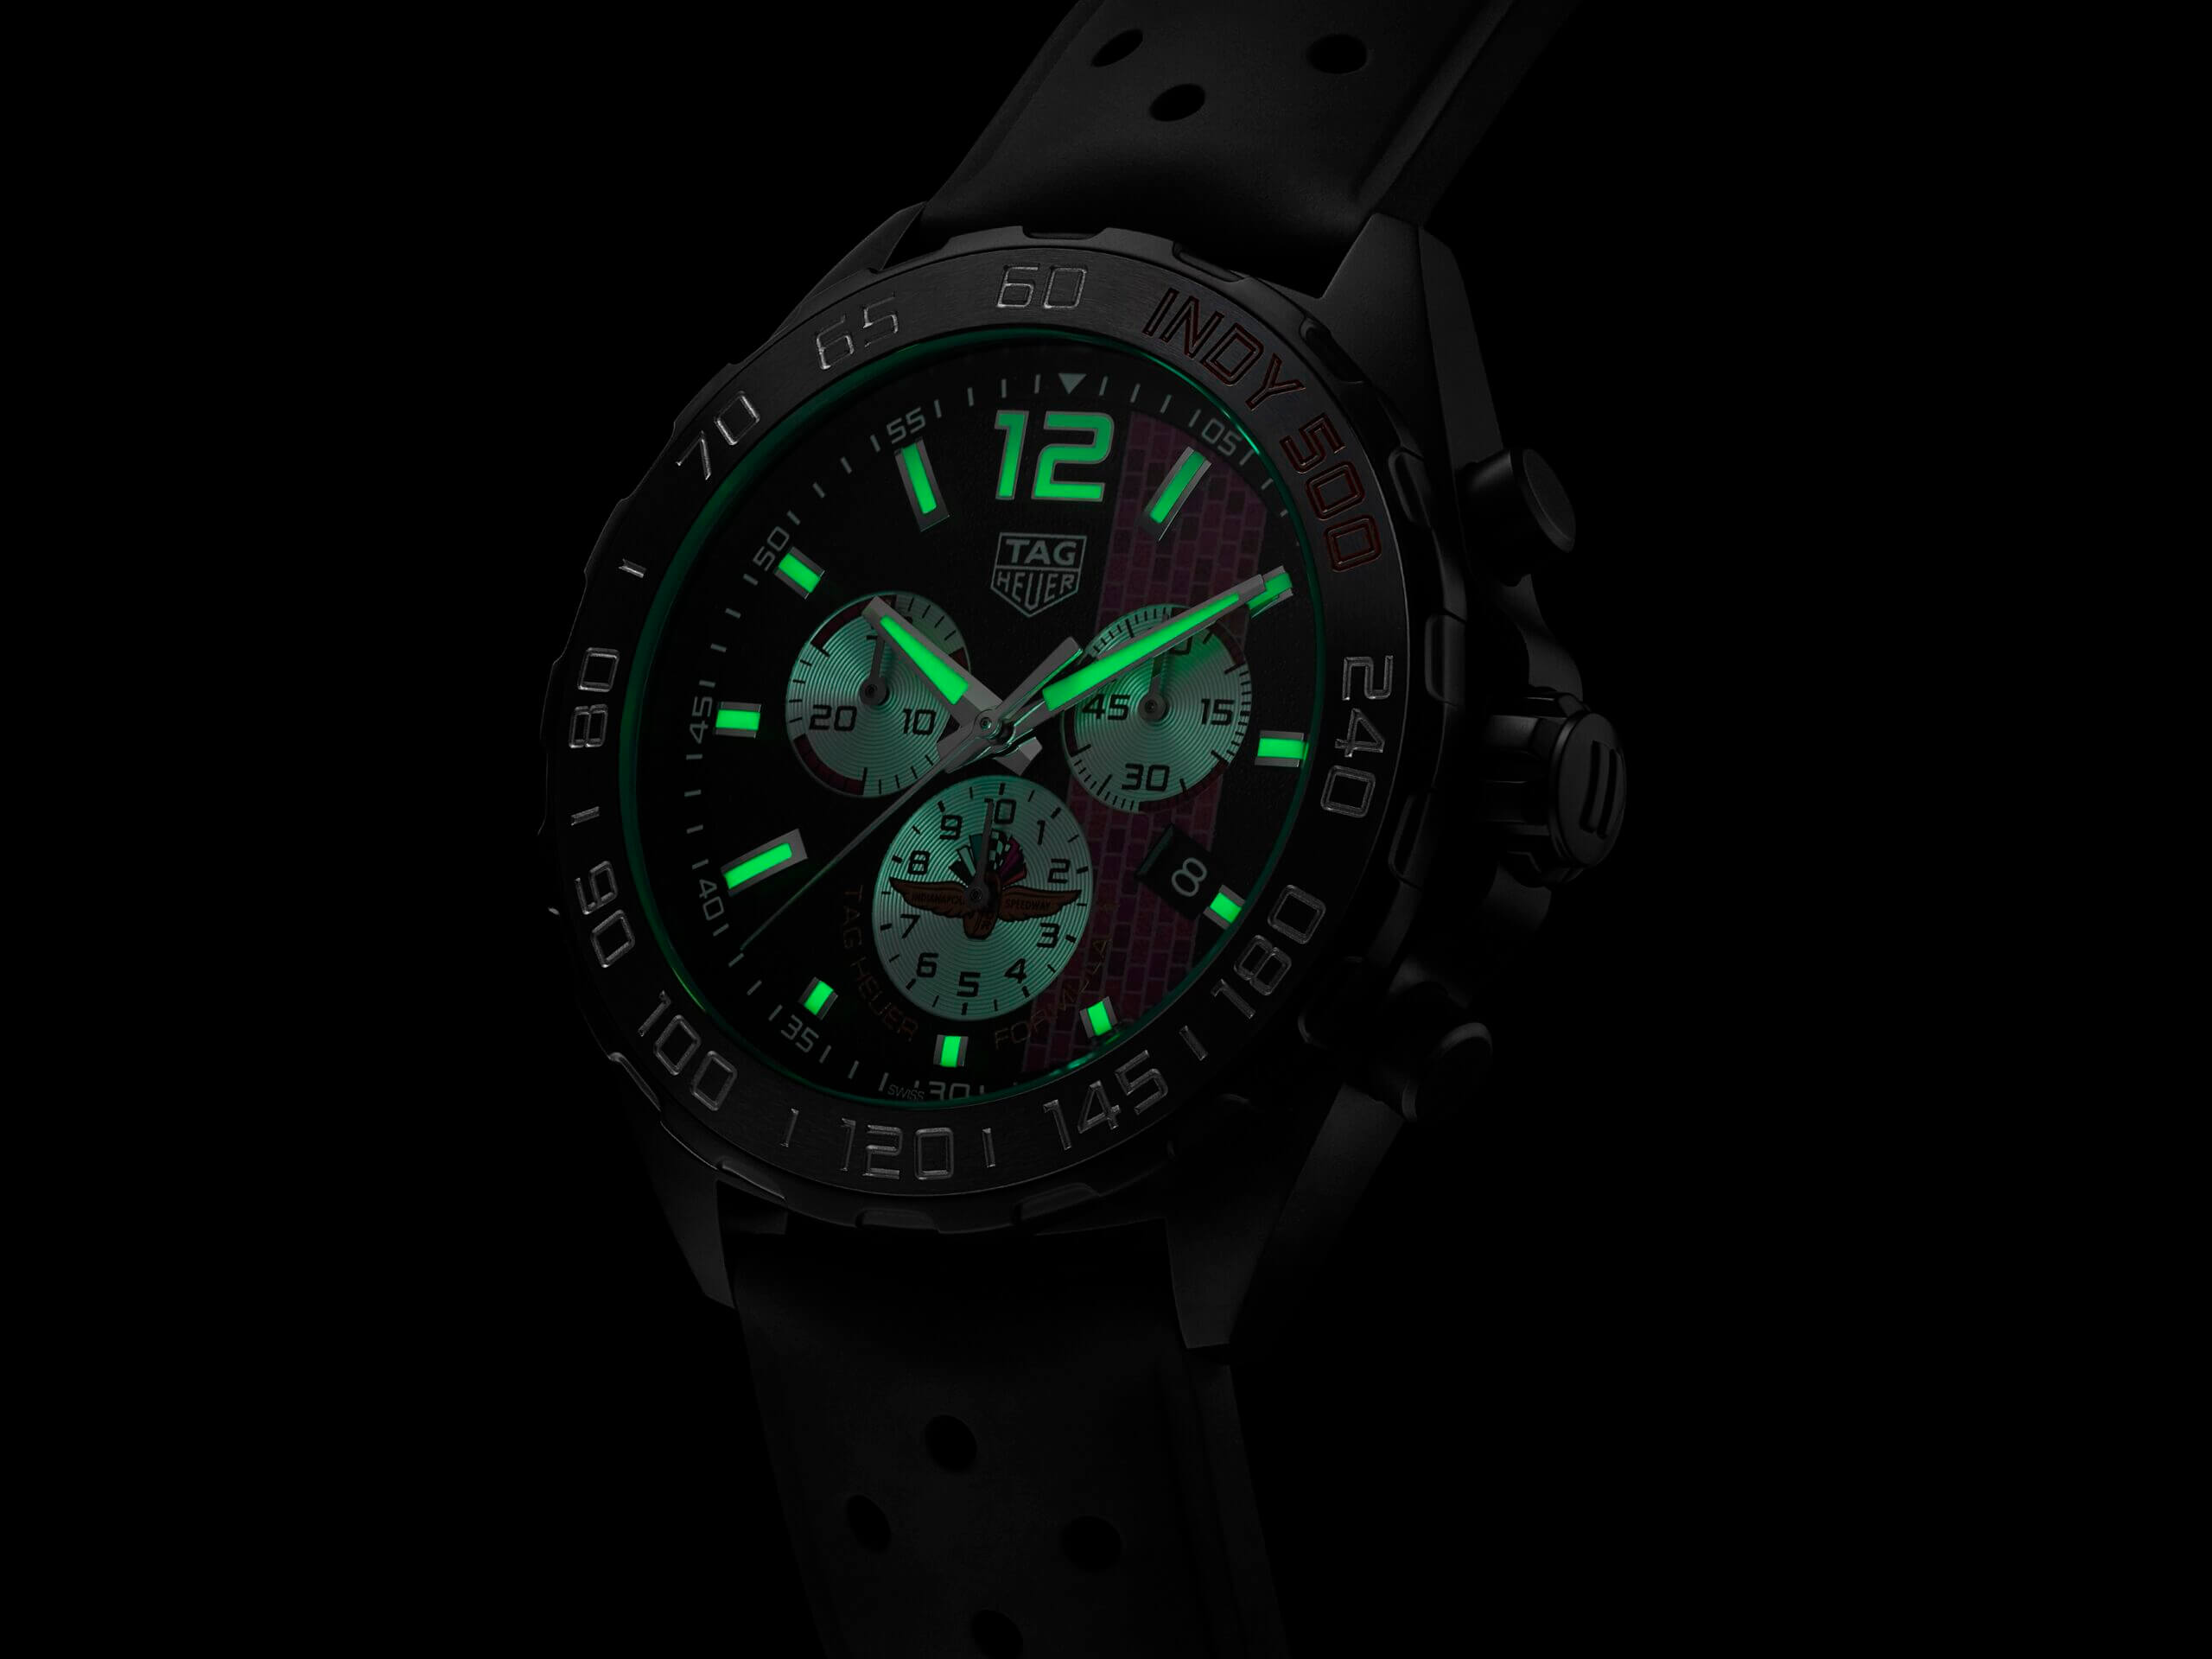 Tag heuer celebrates 104th indianapolis 500 with 2020 racing-inspired limited edition1